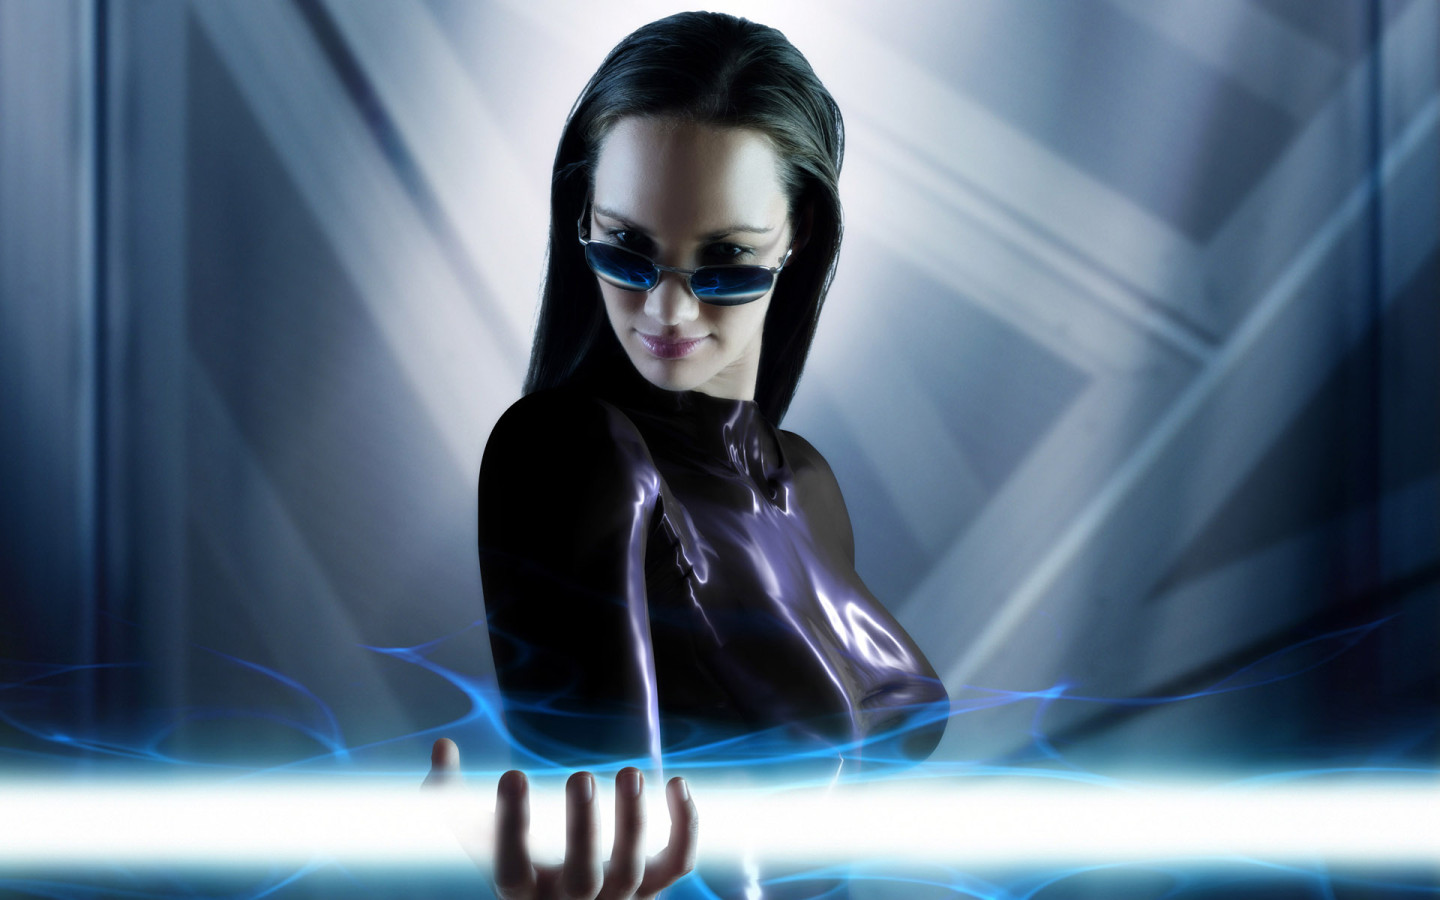 Previous, Photoshop - The girl and laser wallpaper